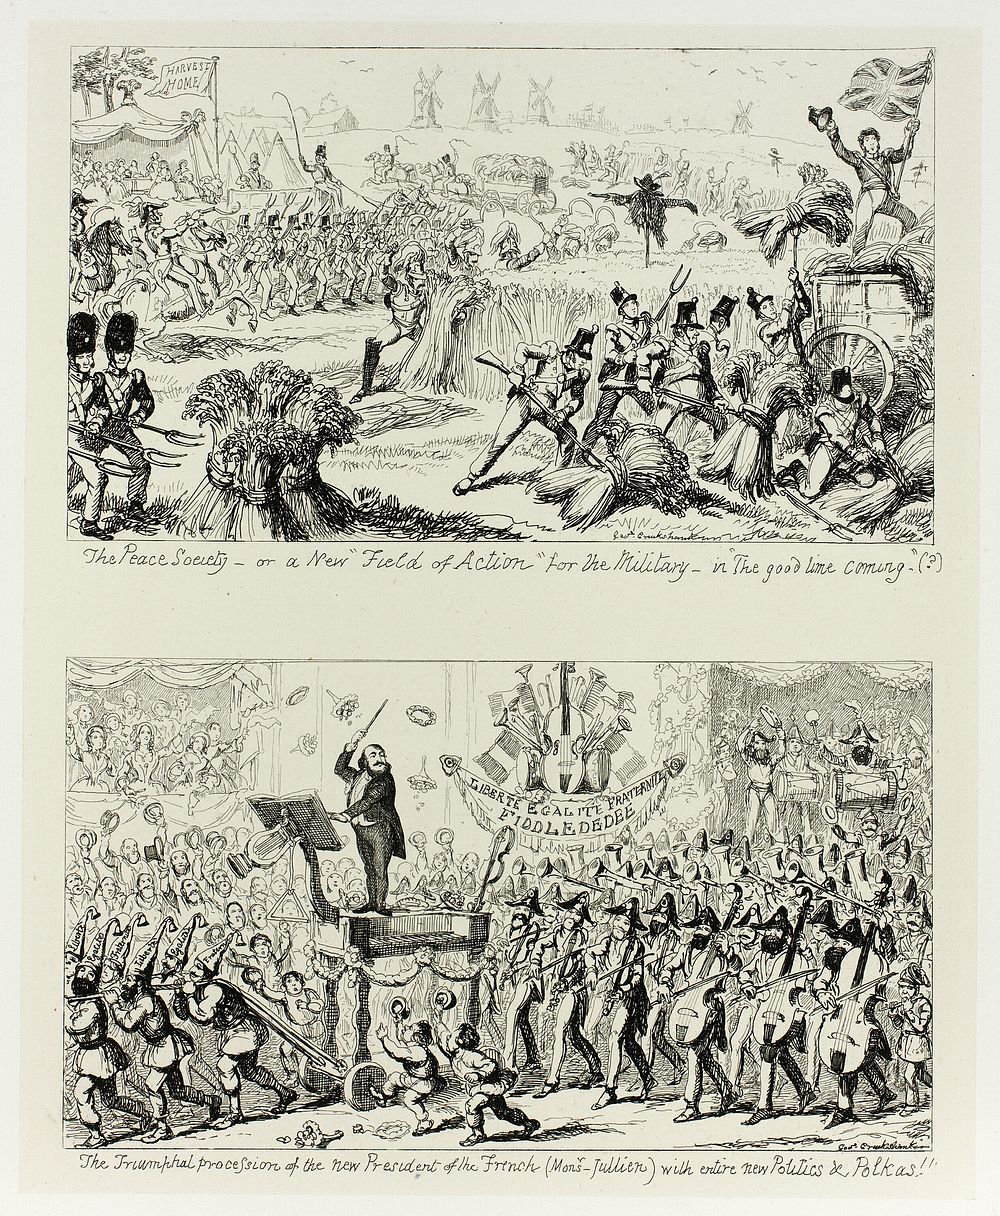 The Peace Society, or a New "Field of Action" for the Military - in "The Good Time Coming" from George Cruikshank's Steel…